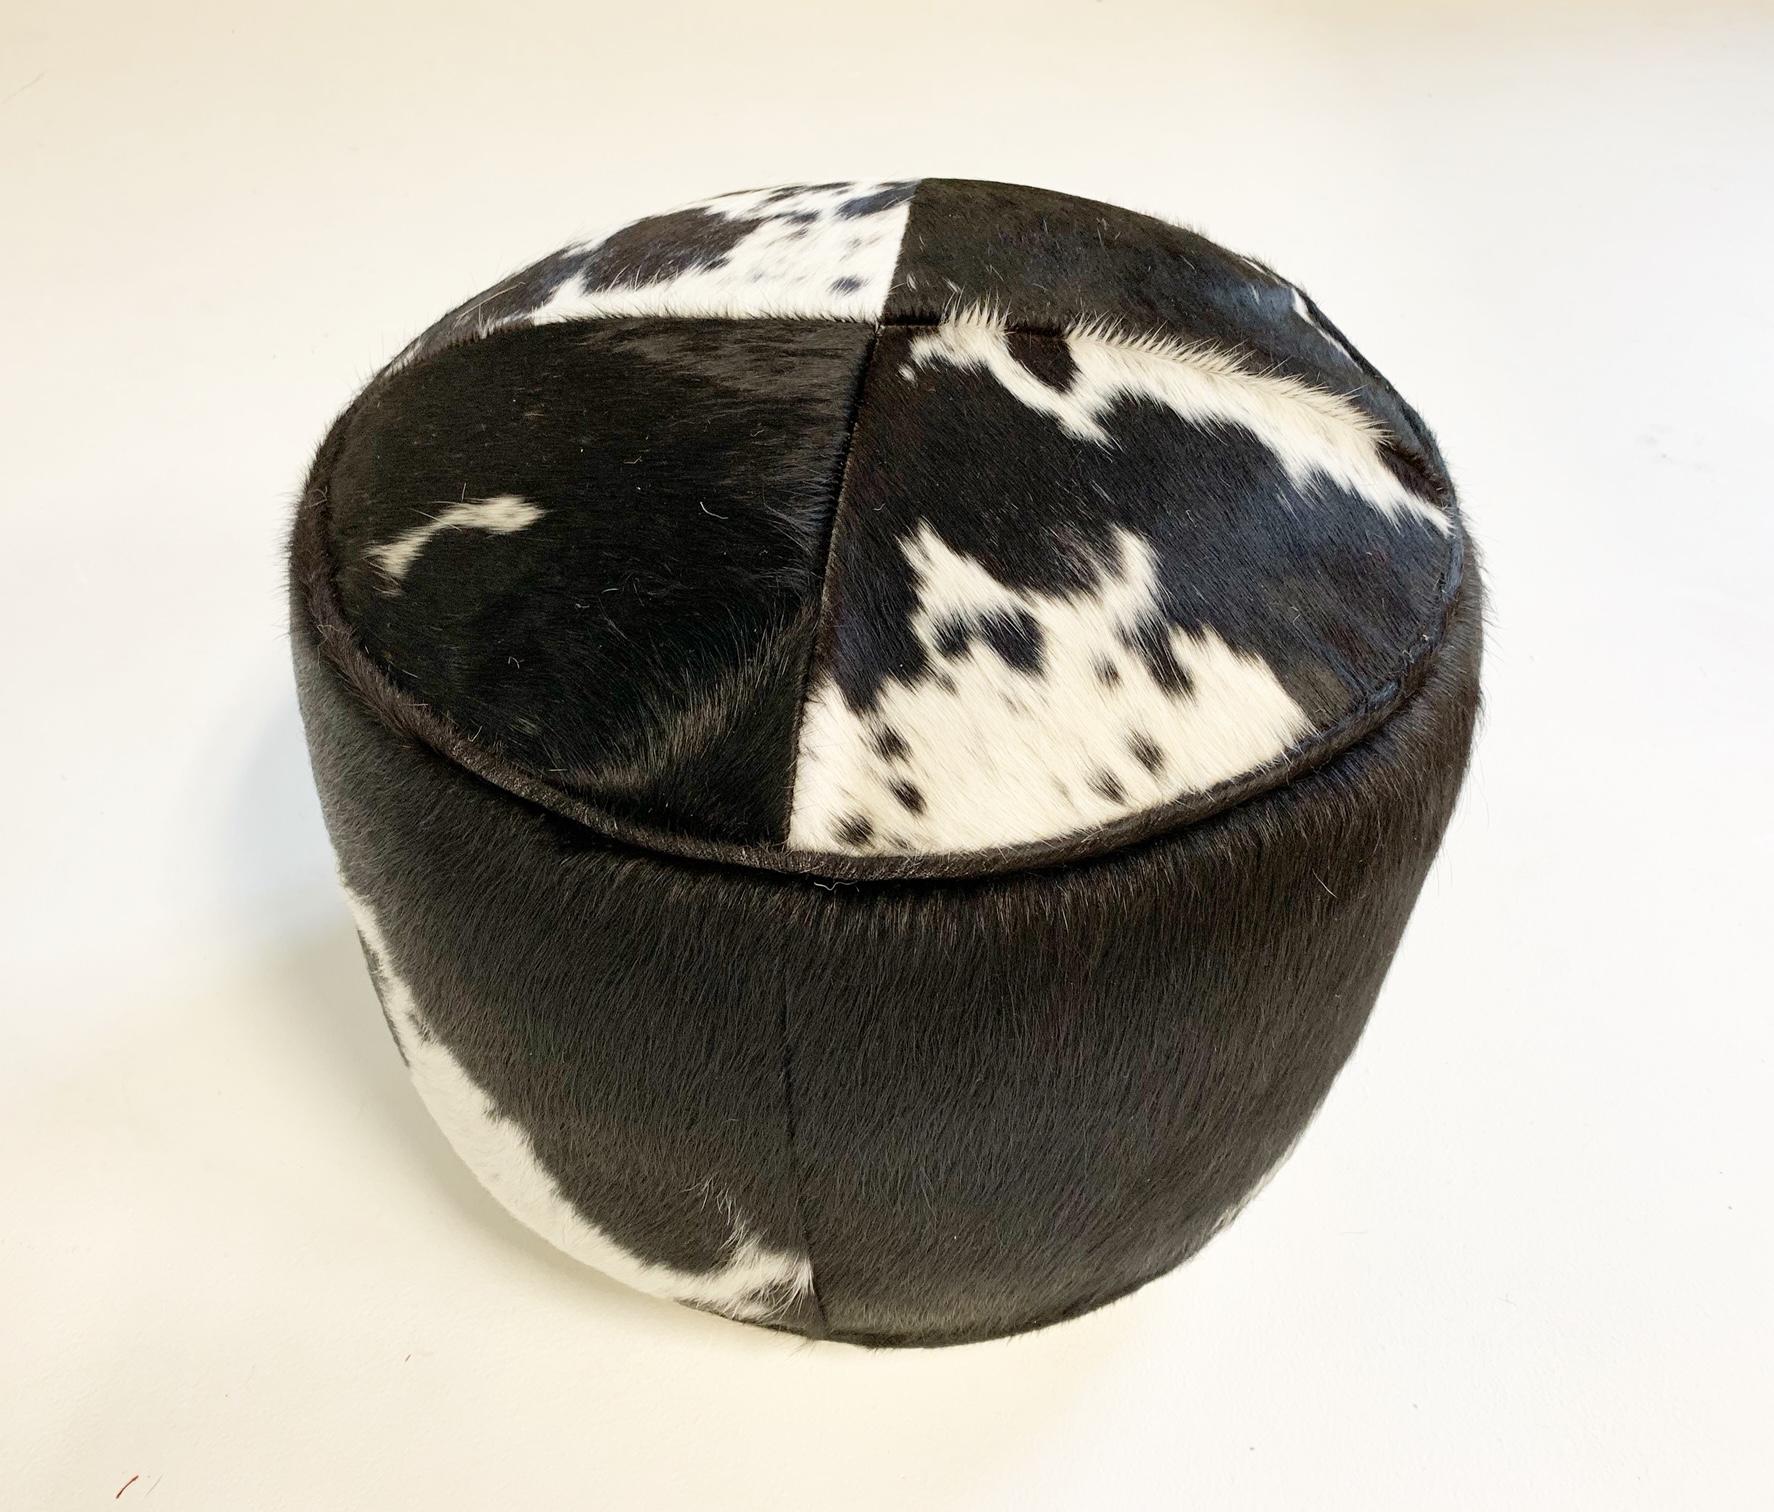 black and white cowhide ottoman